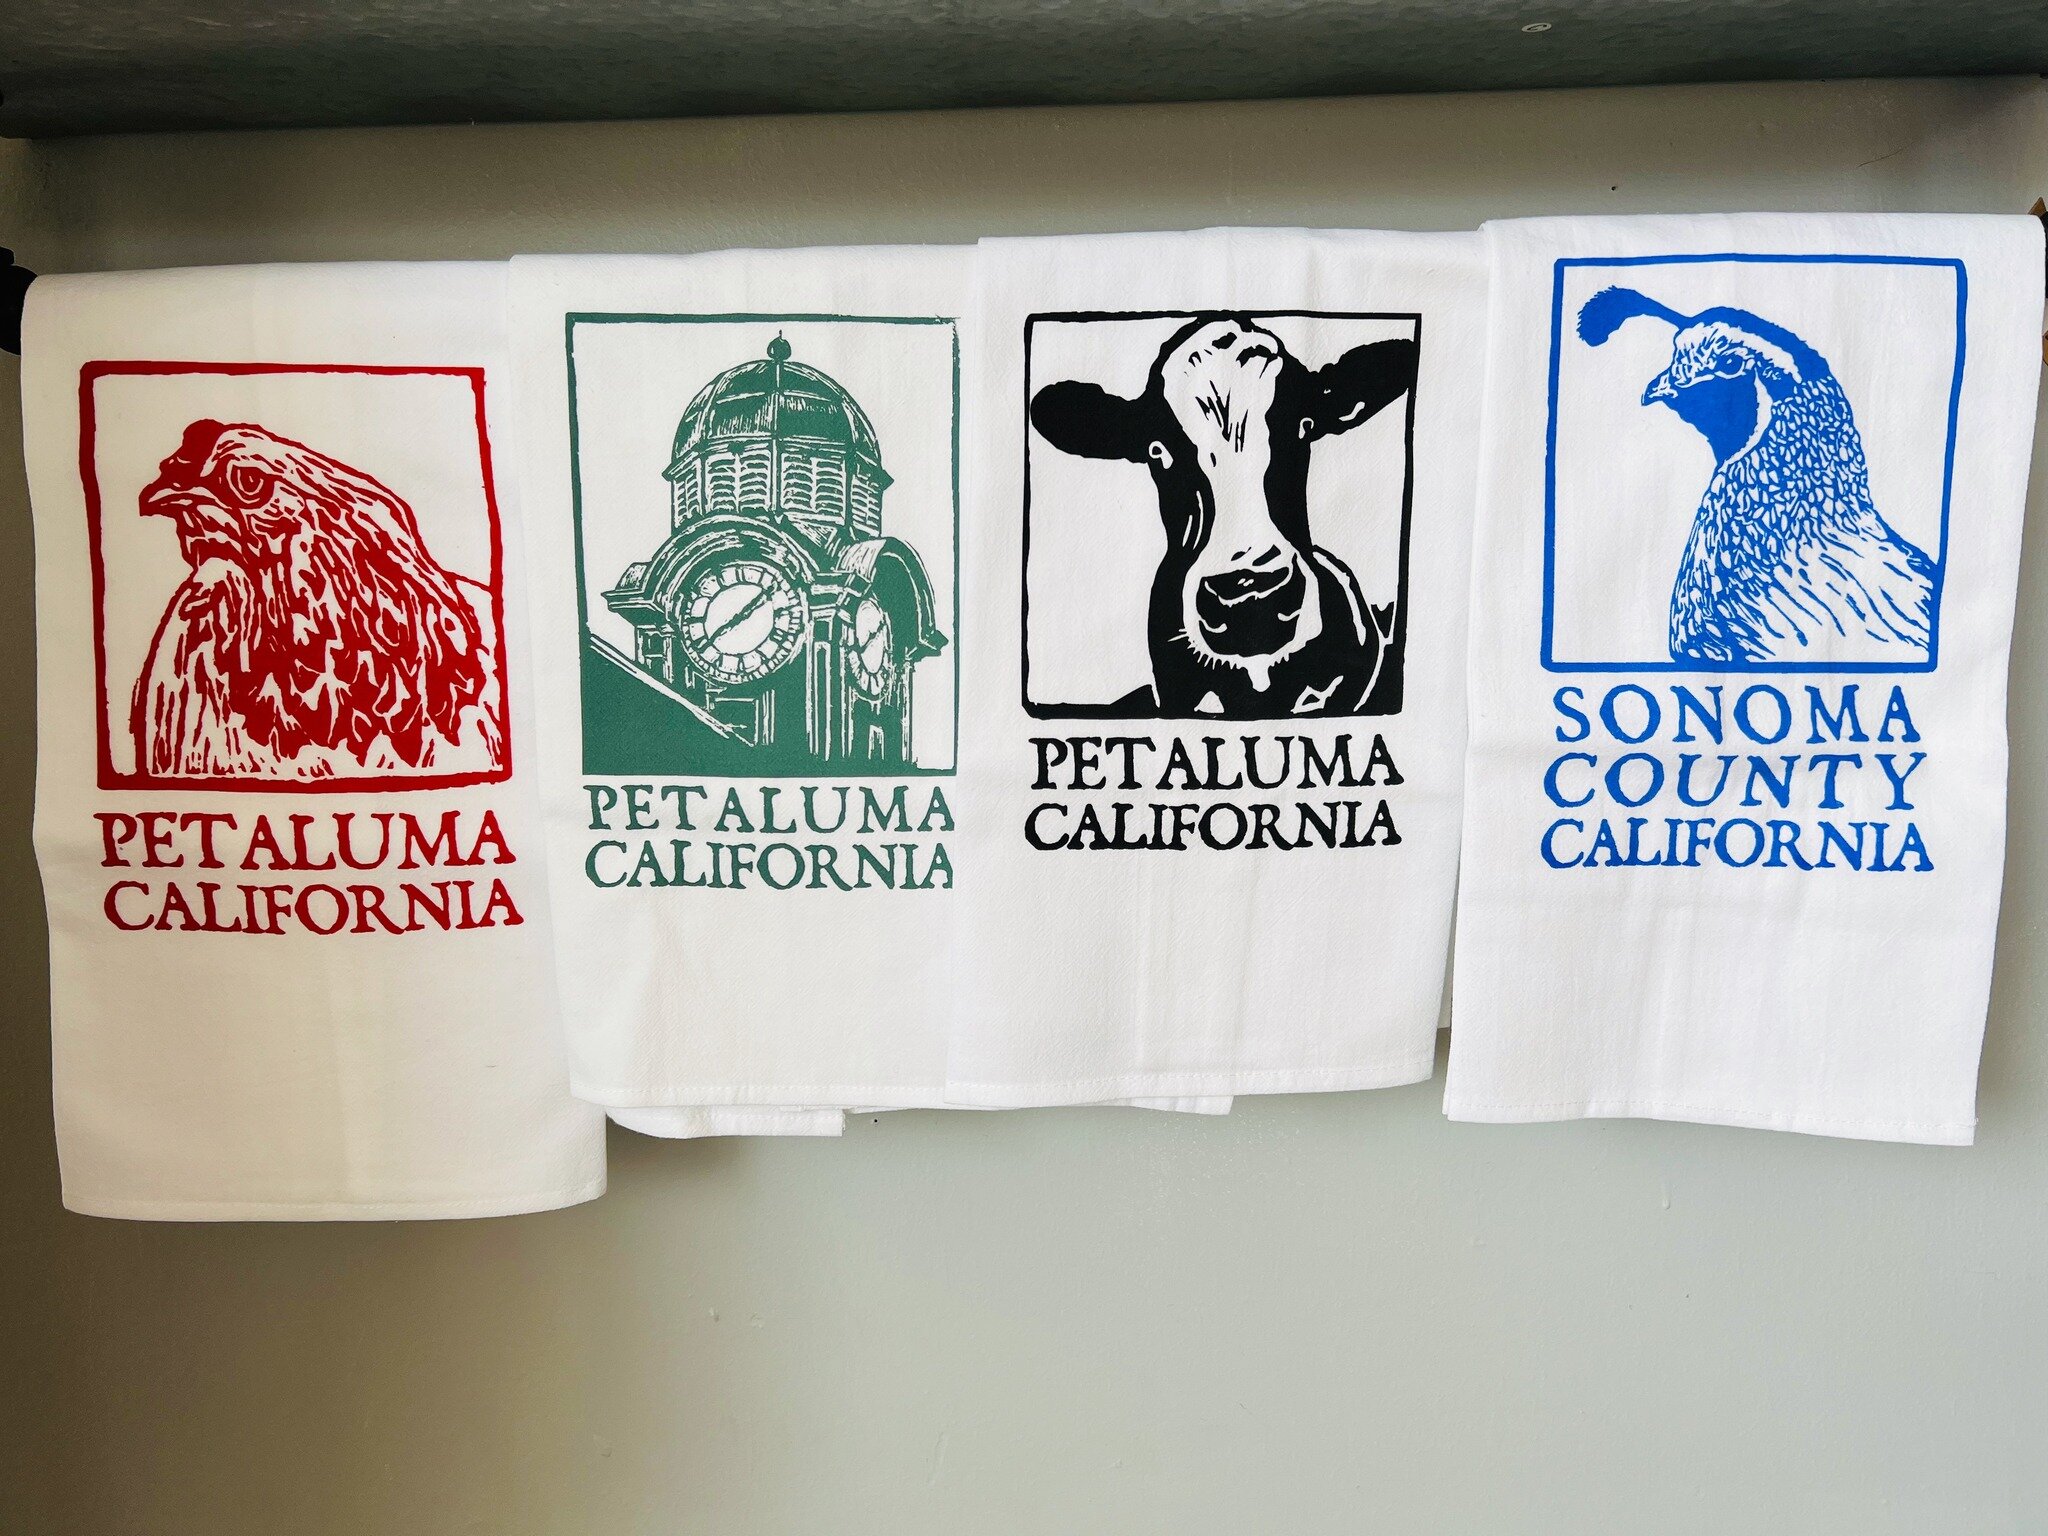 We are fully restocked on our MOST POPULAR item - the flour sack towel!  These are a great gift for moms, hostesses, friends you visit, or just for yourself!

 #petaluma #petalumaca #petalumalocal #petalumafoodie #petalumafoodies #petalumacalifornia 